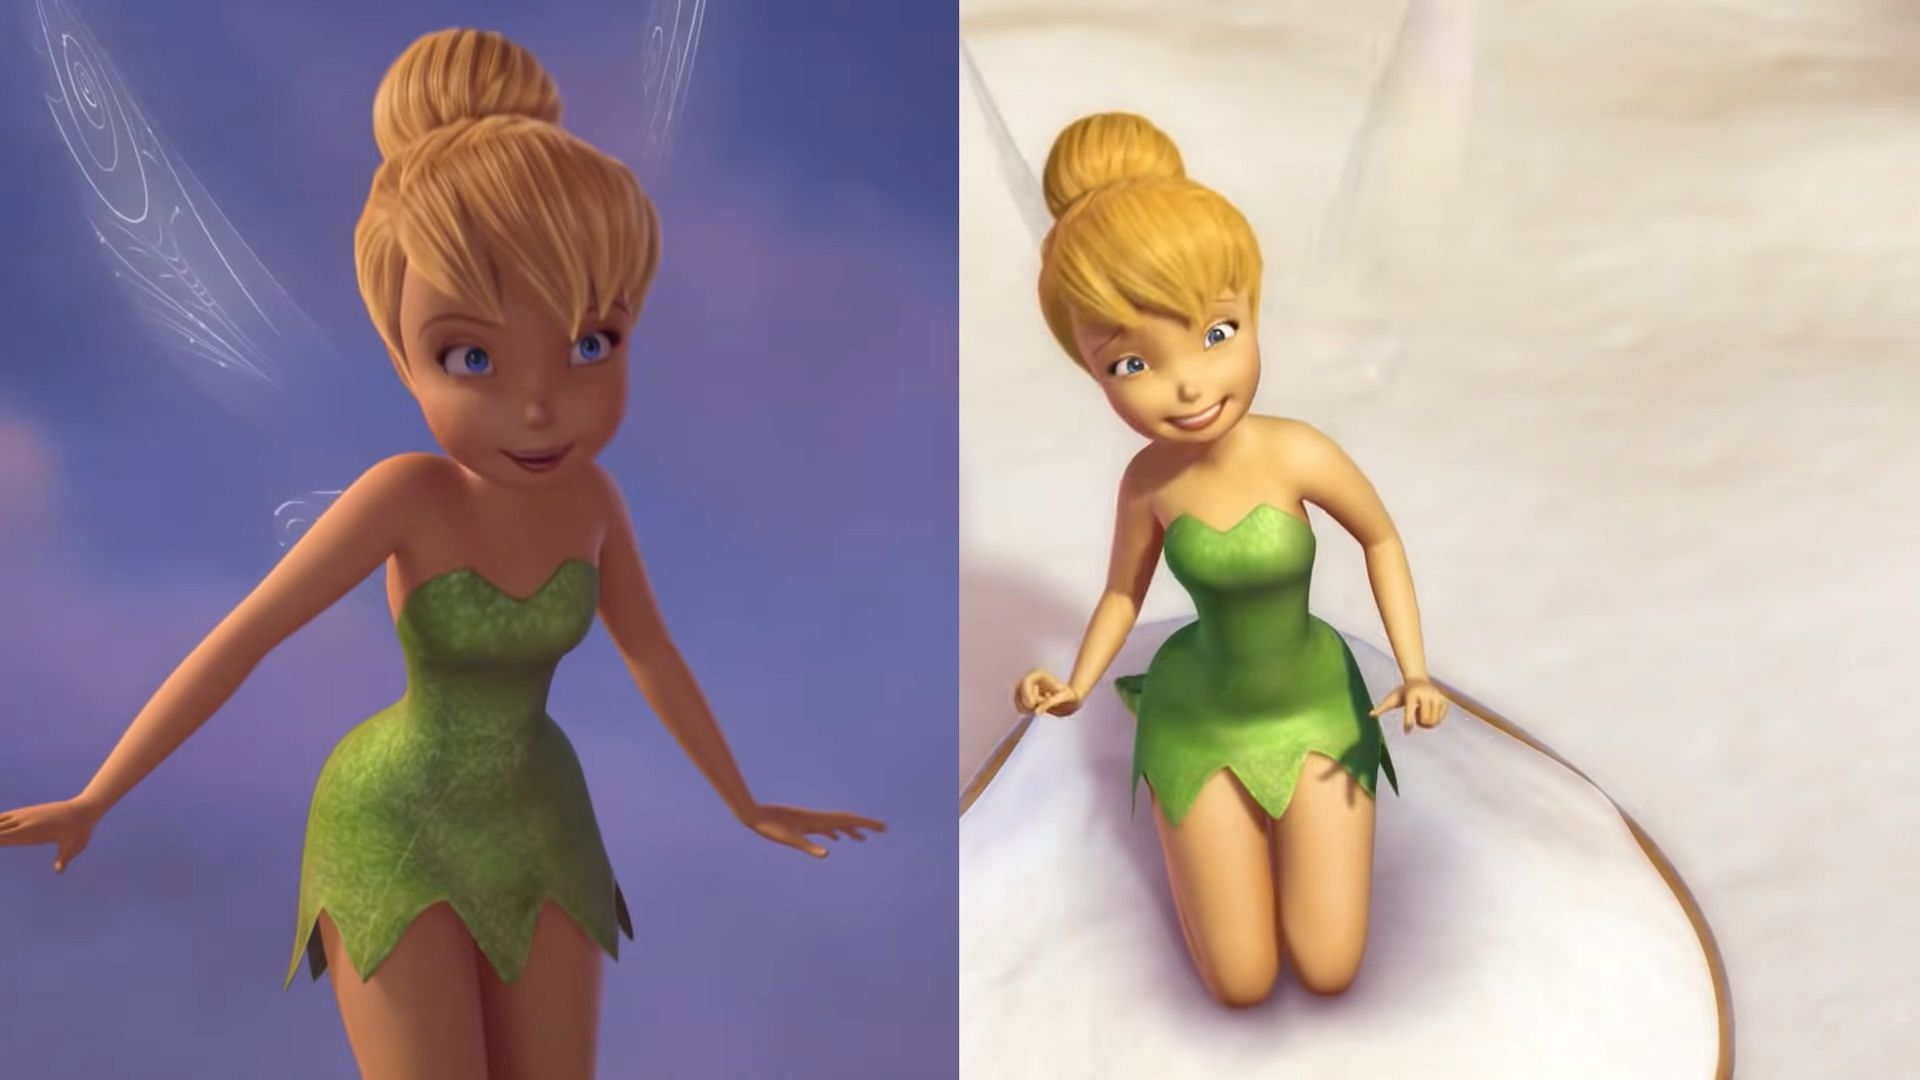 Internet reacts to reports of Disney World removing Tinkerbell from its theme parks deeming the character 